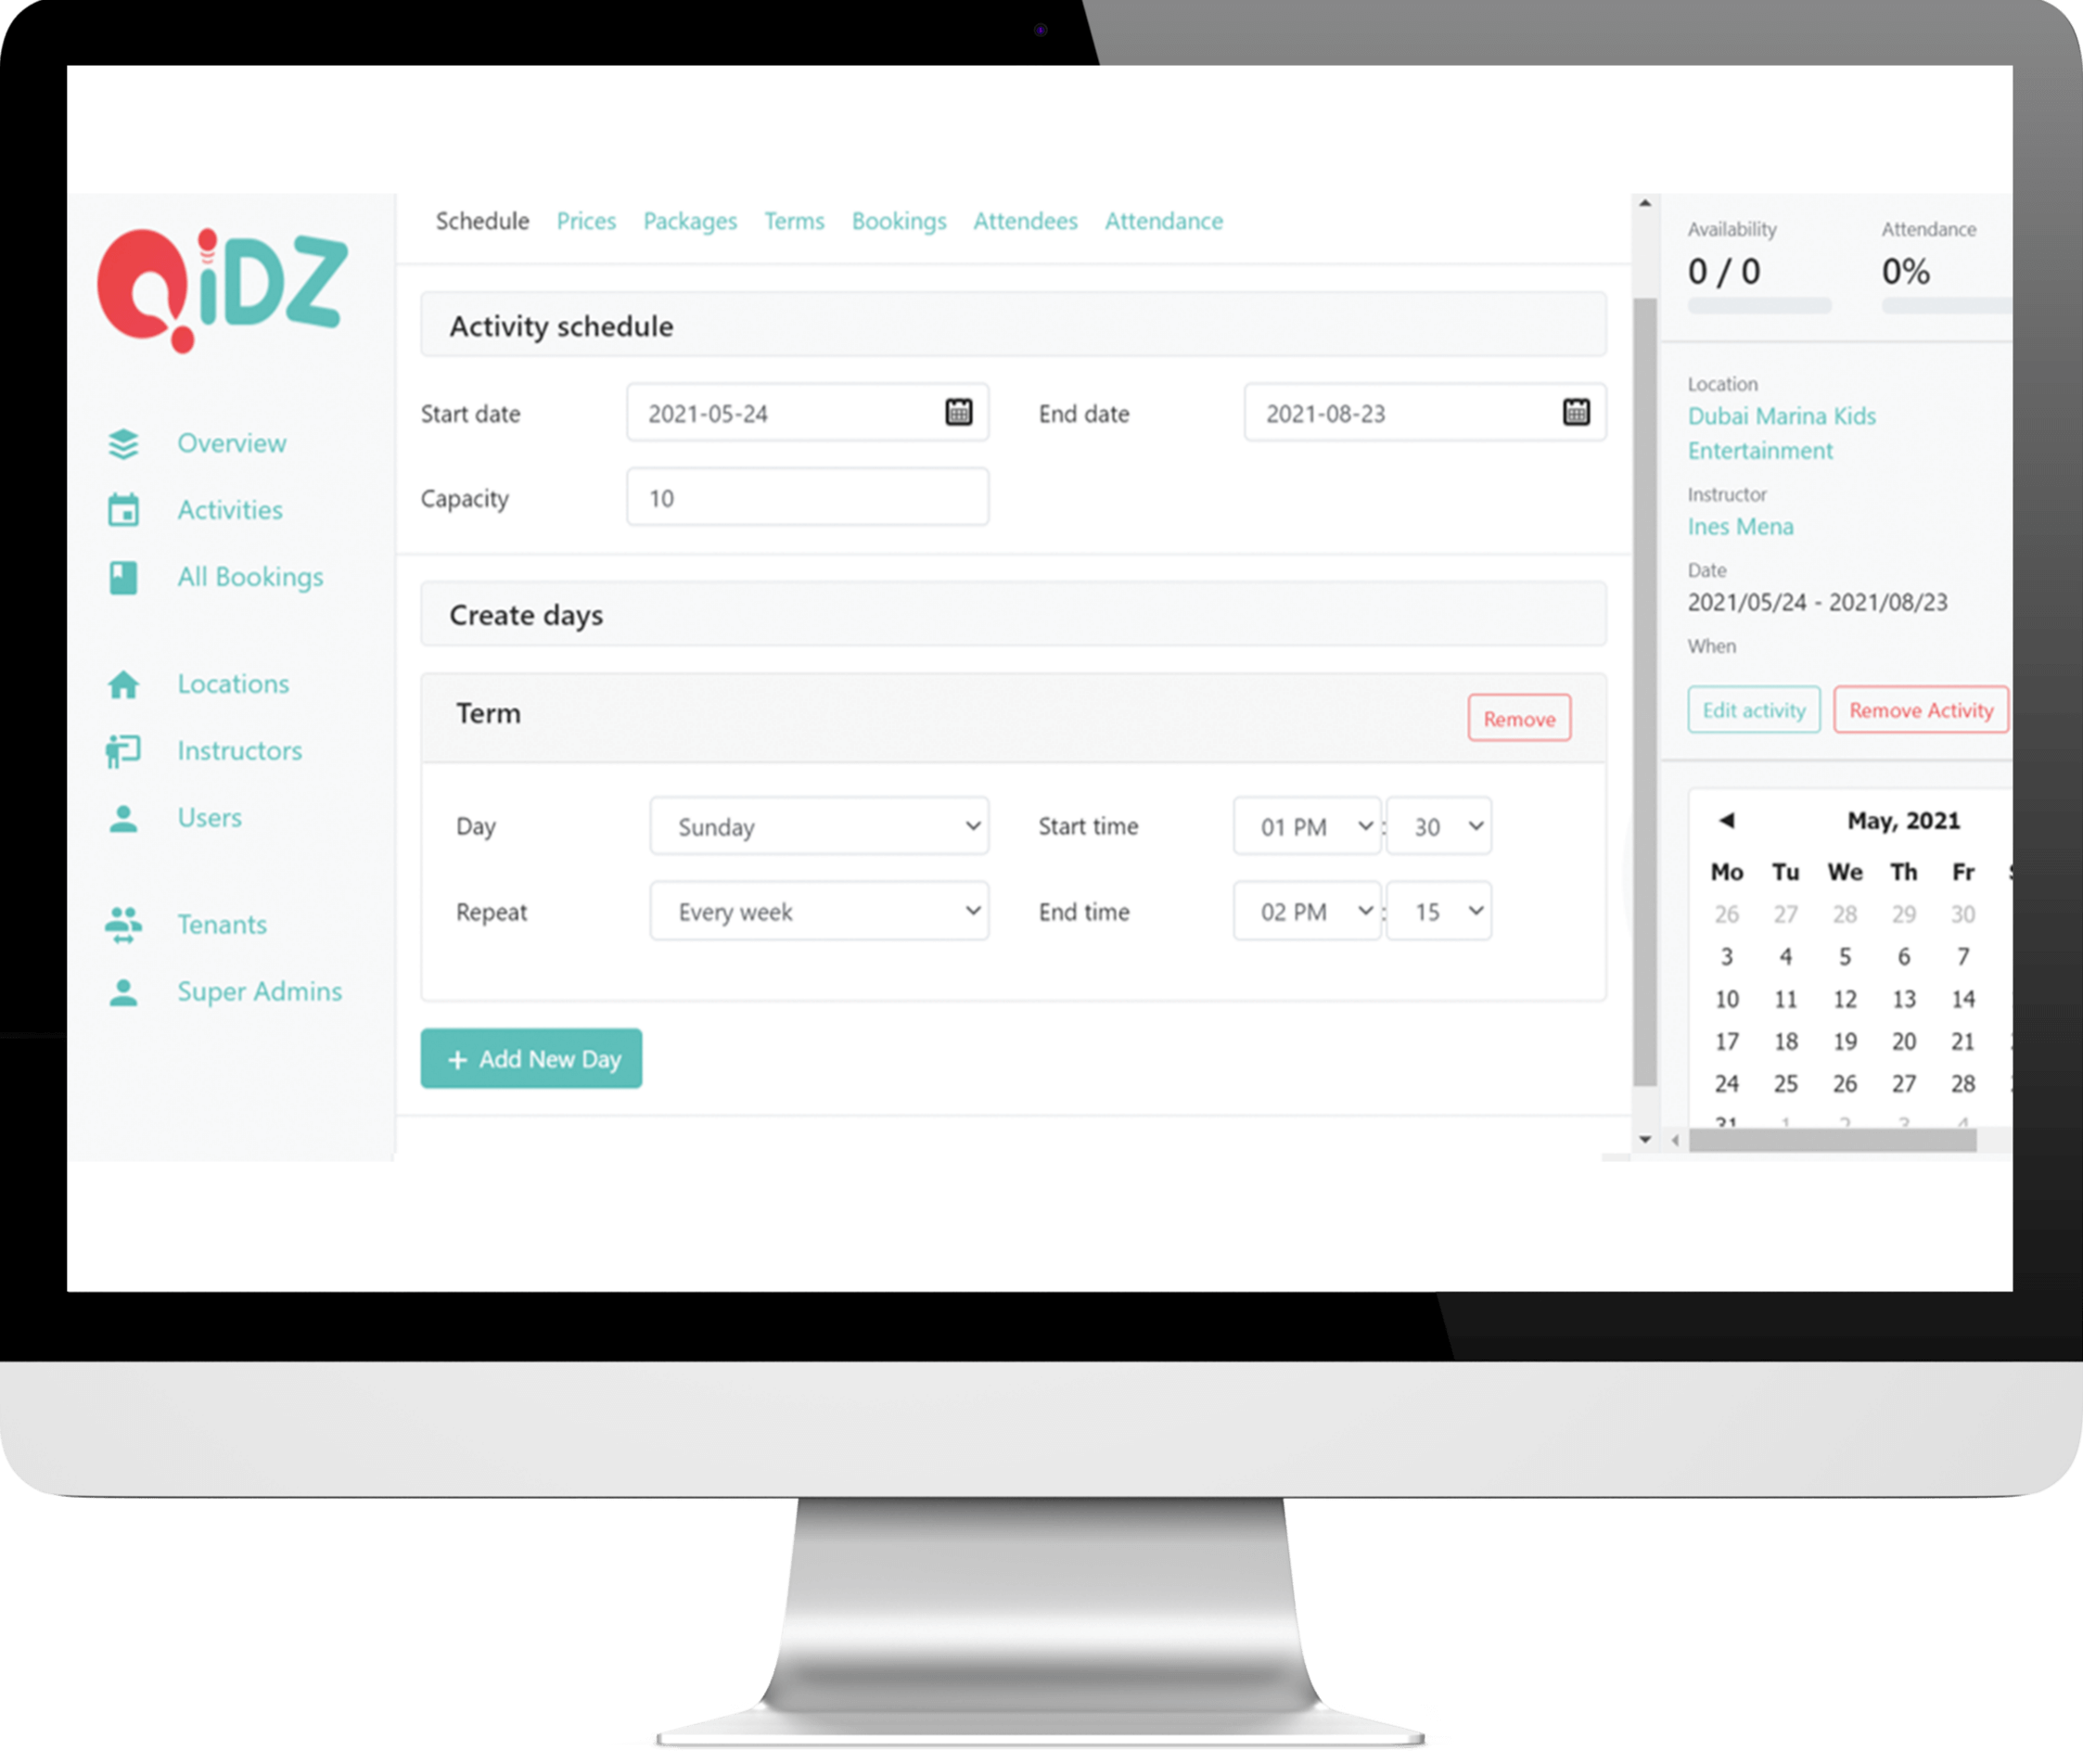 Set up activity details, schedule, prices, bookings and attendance with our scheduling system